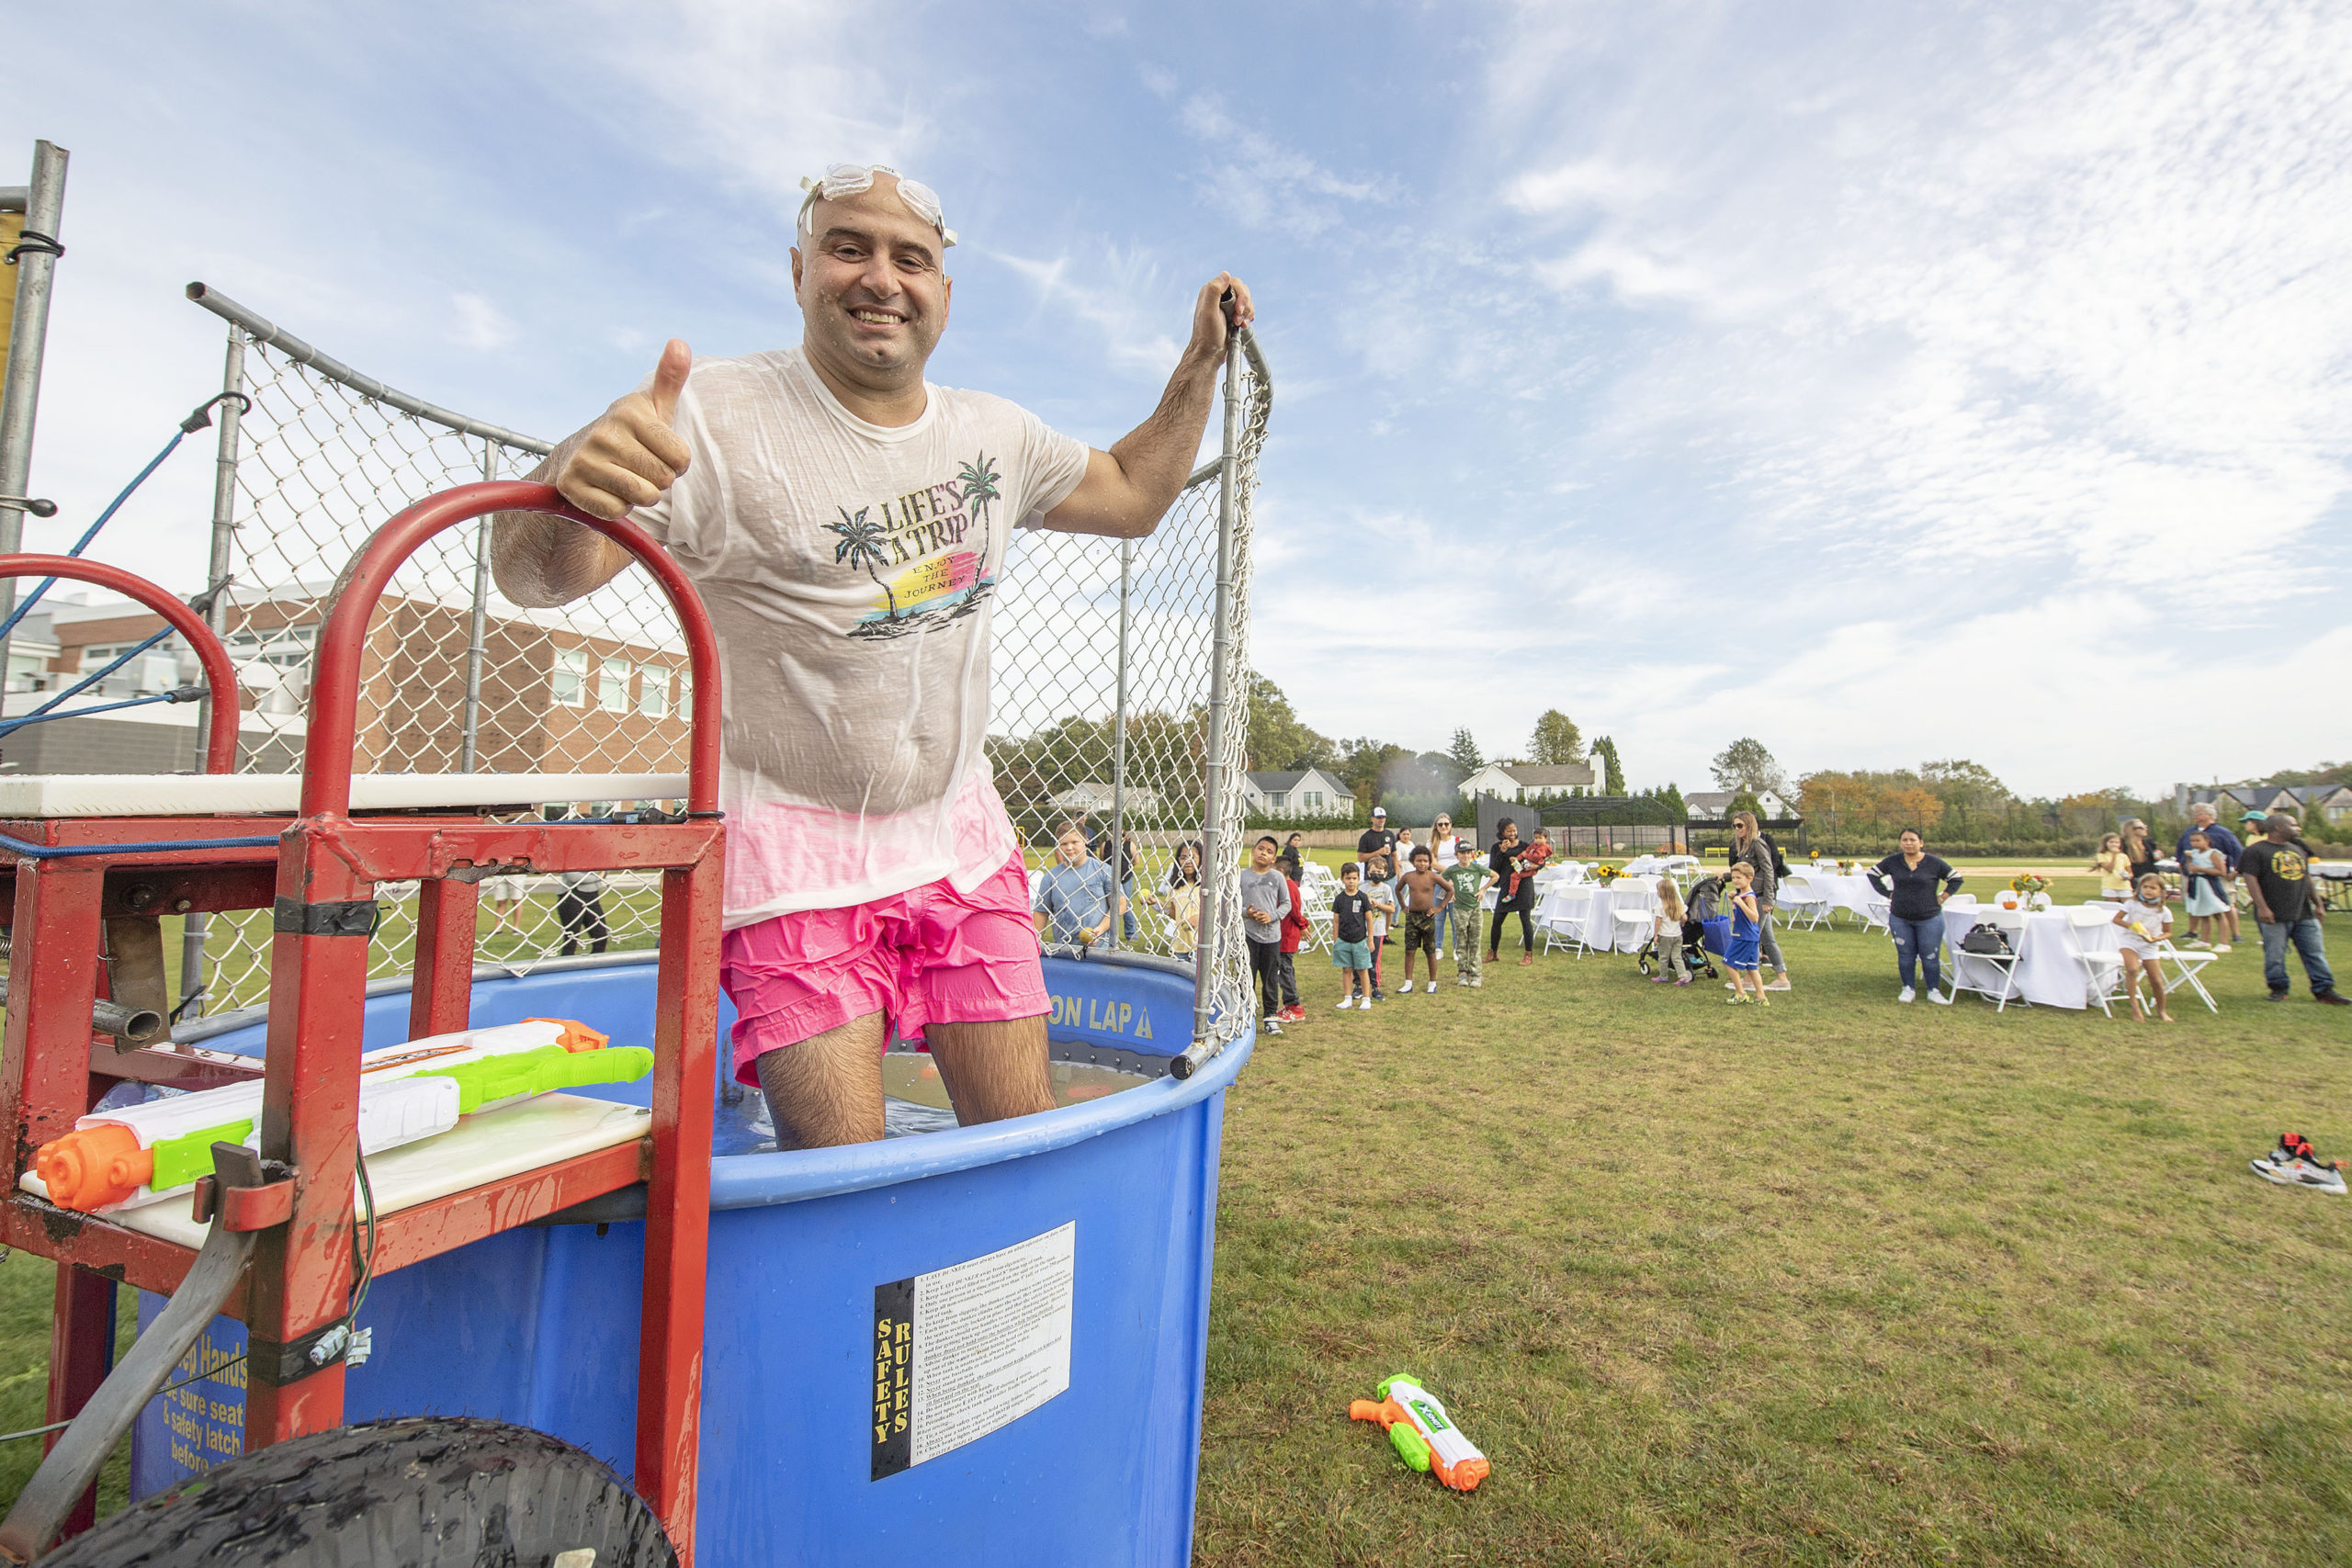 Bridgehampton School Athletic Director Michael DeRosa gives a thumbs-up after being dunked by a student during the first annual Bridgehampton Community Day that was held behind the Bridgehampton School on Saturday.     MICHAEL HELLER